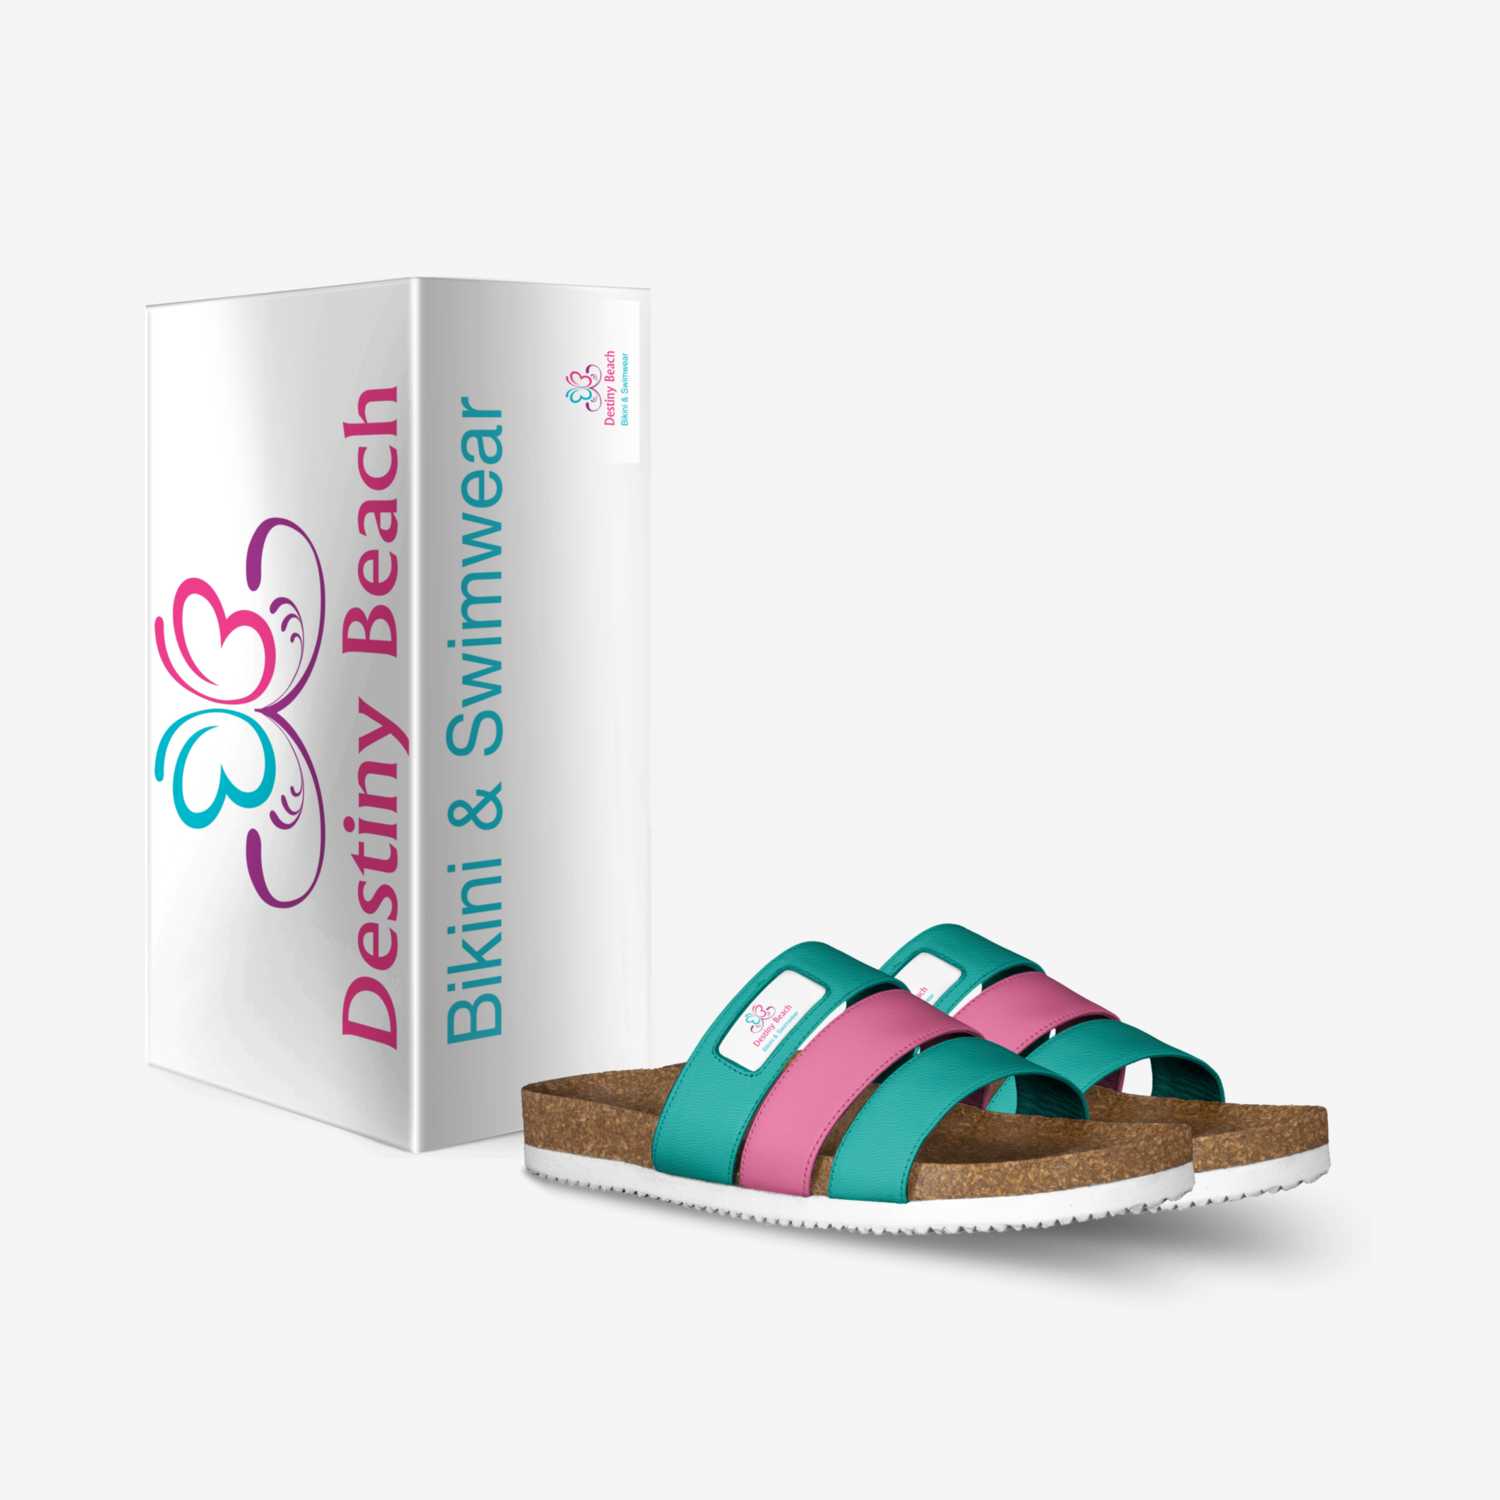 Destiny Beach custom made in Italy shoes by Destiny Marie | Box view